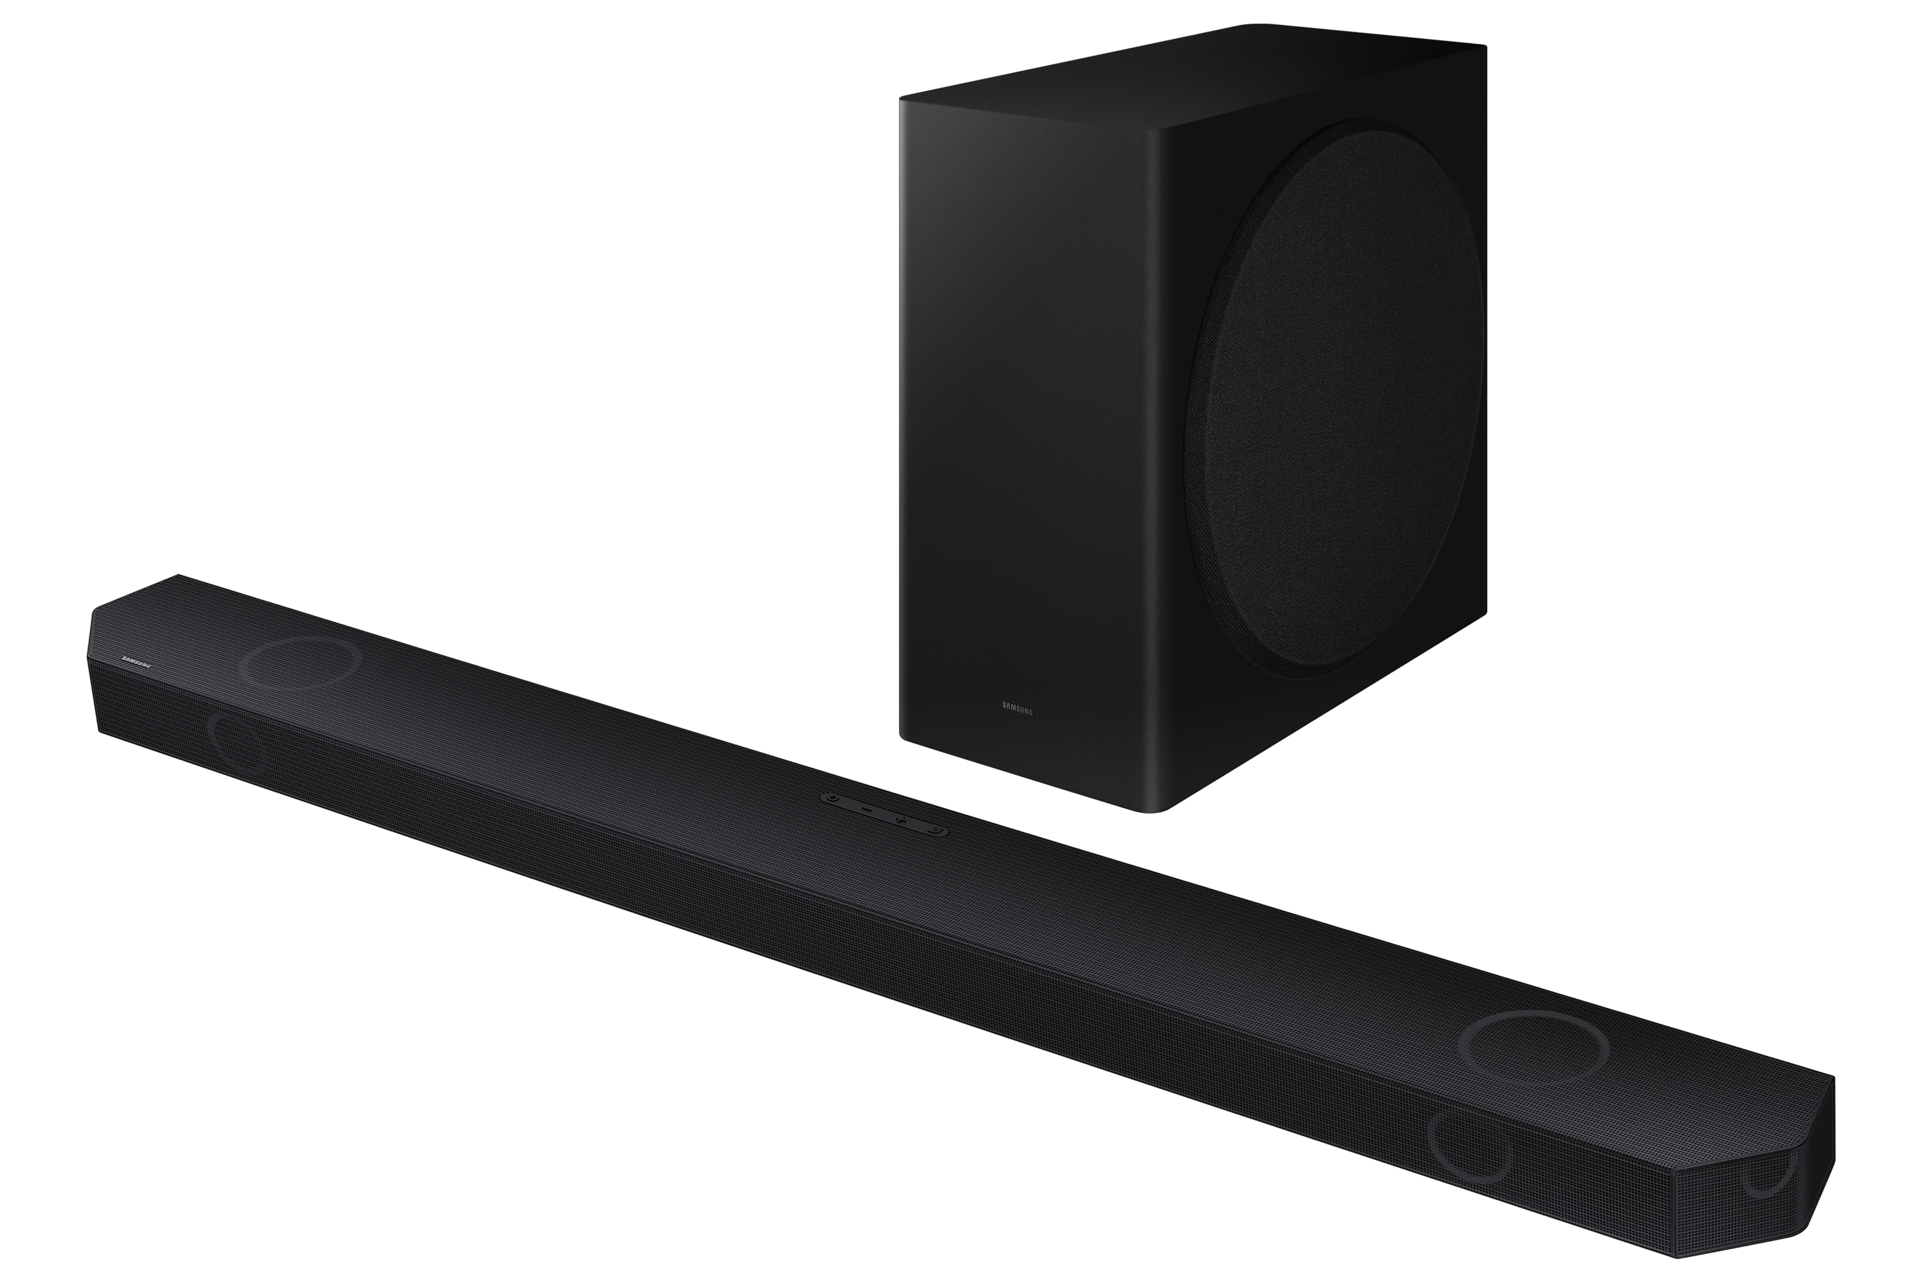 Latest Samsung Q Series Soundbar with Subwoofer (HW-Q800C/XM) - set-r-perspective view, Black color at best price in Samsung Malaysia